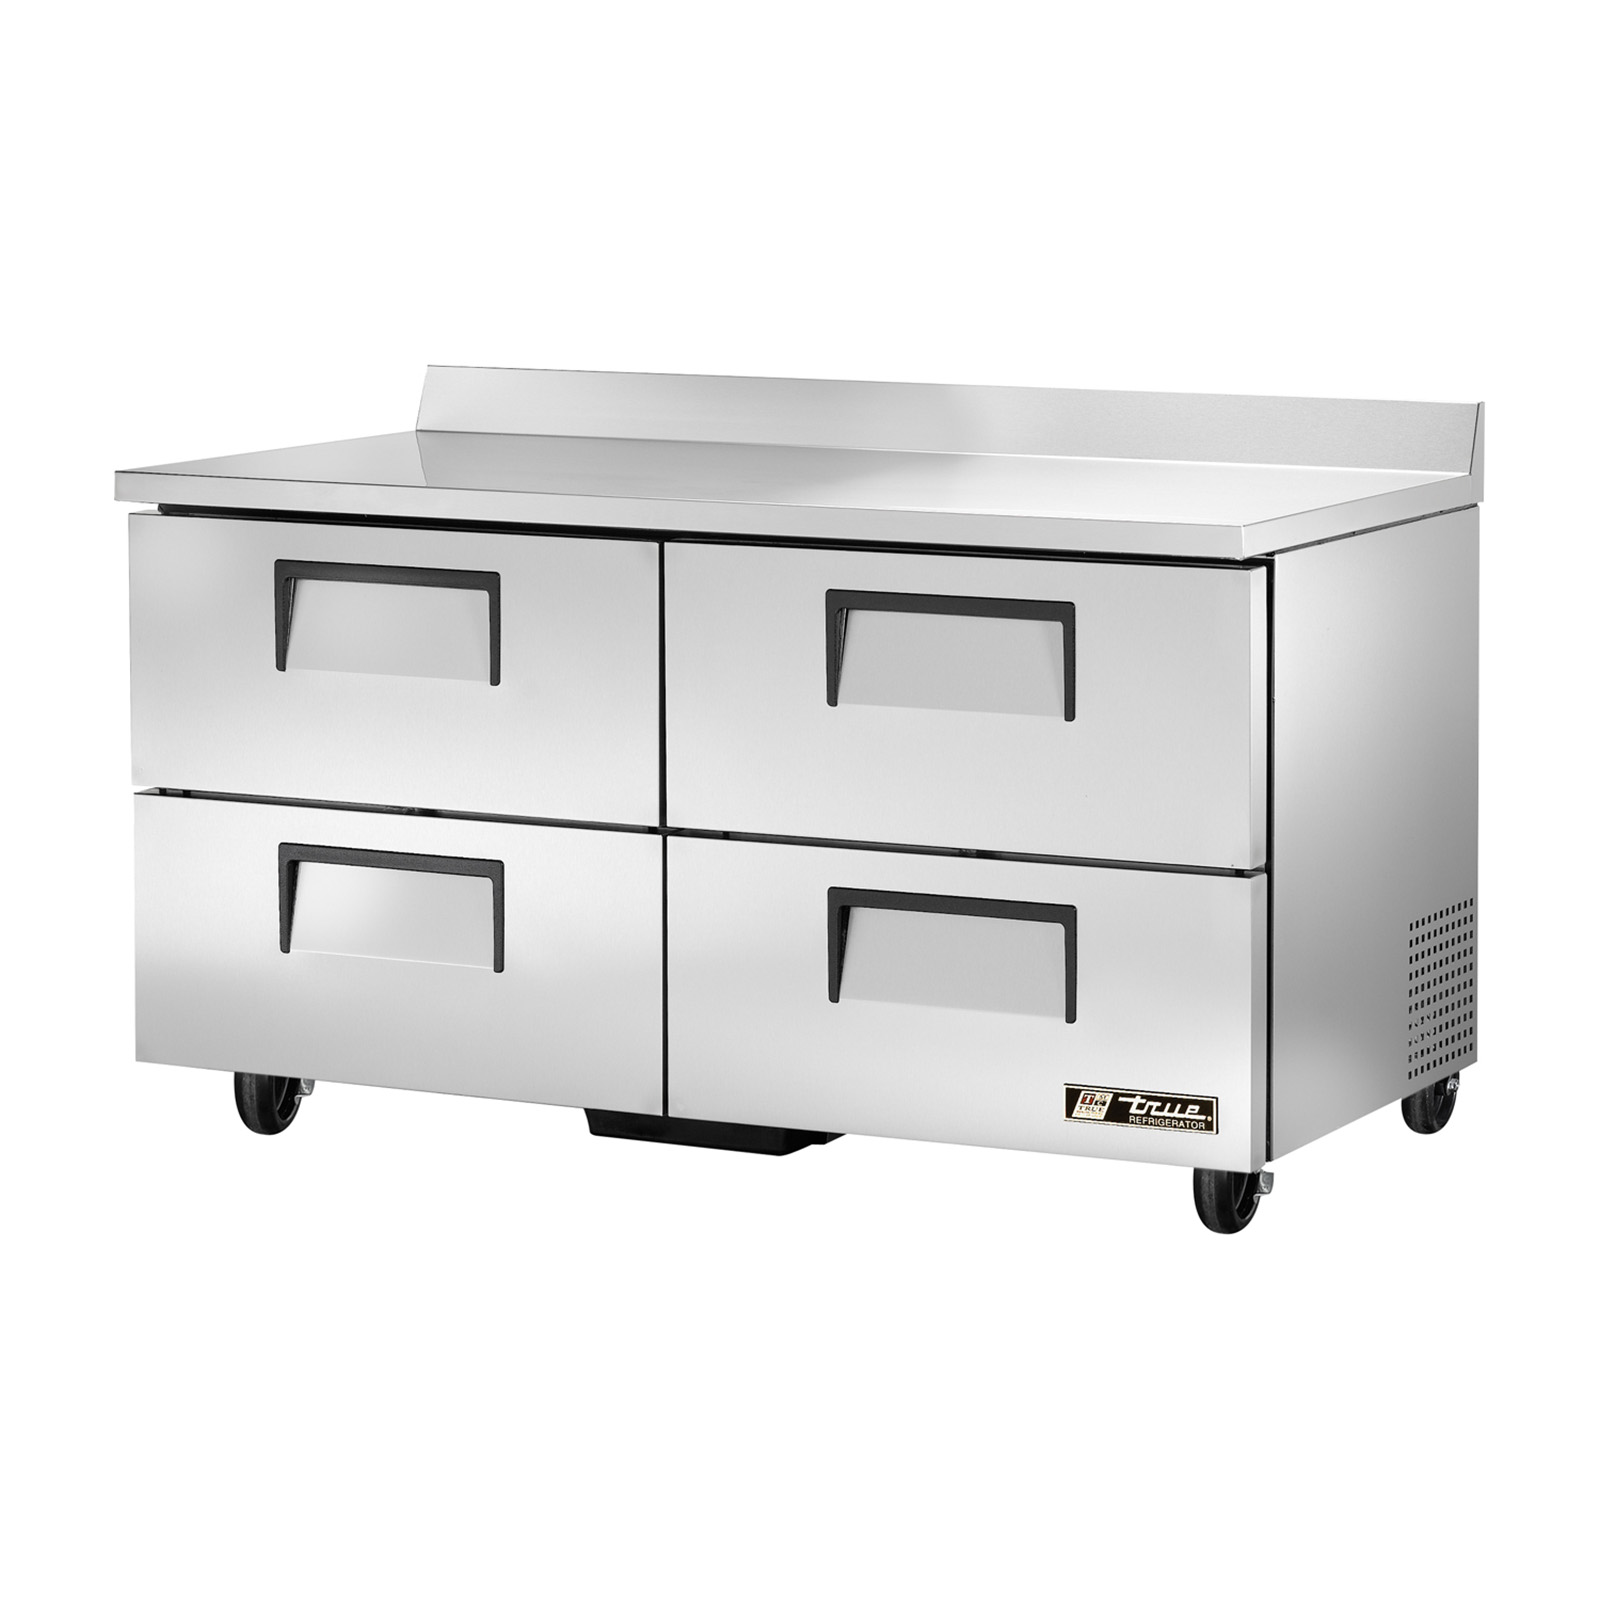 True Food Service Equipment TWT-60D-4 Refrigerated Counter, Work Top